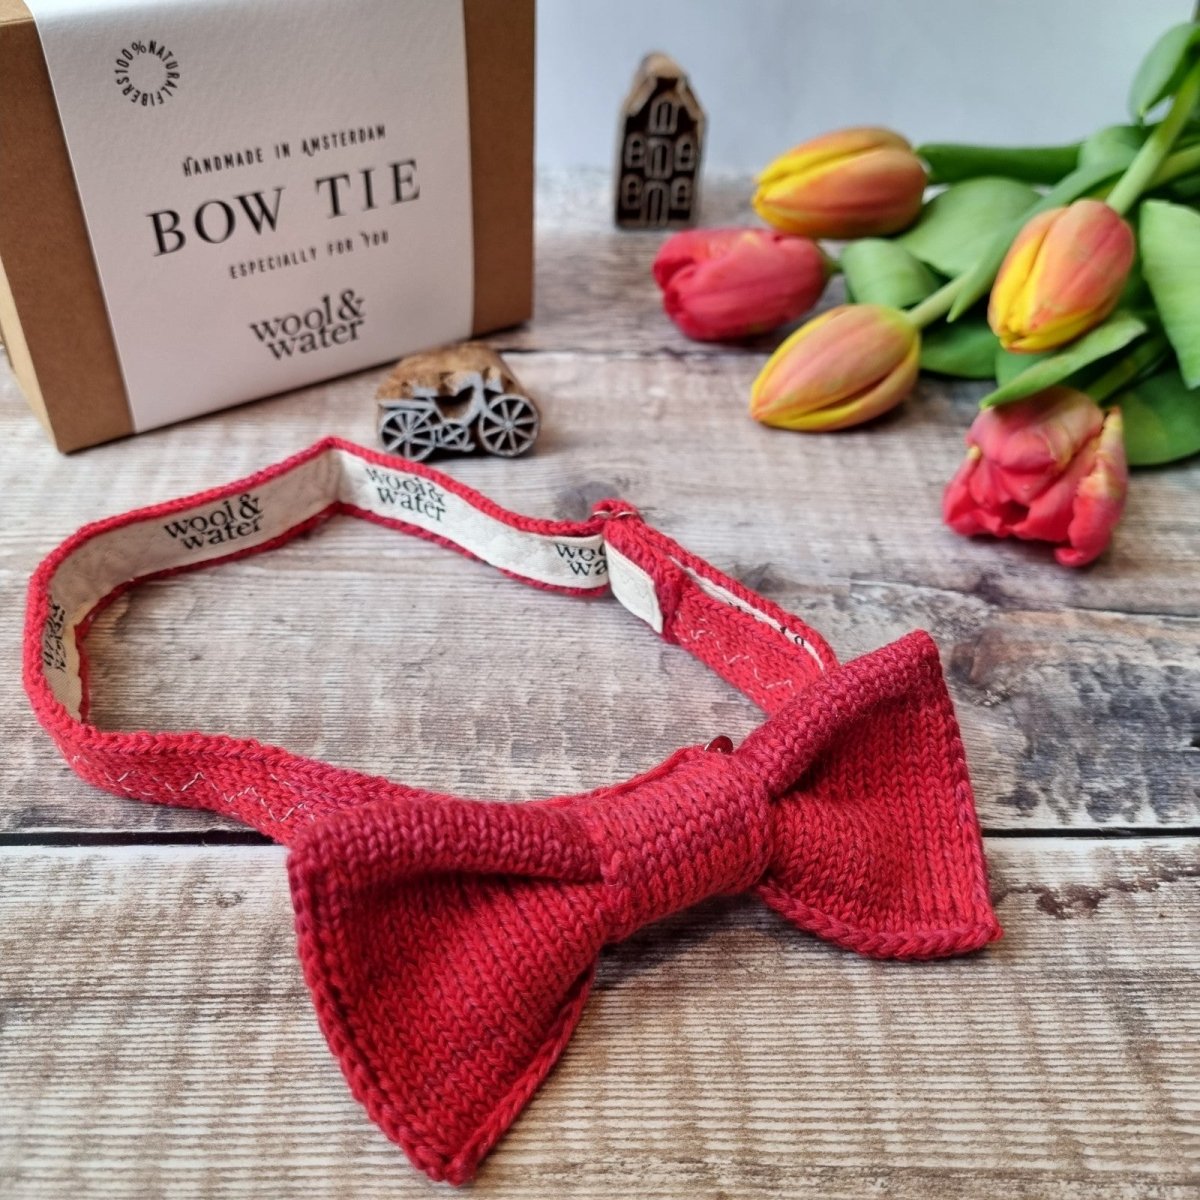 Red Tulip Bow Tie - Wool & Water